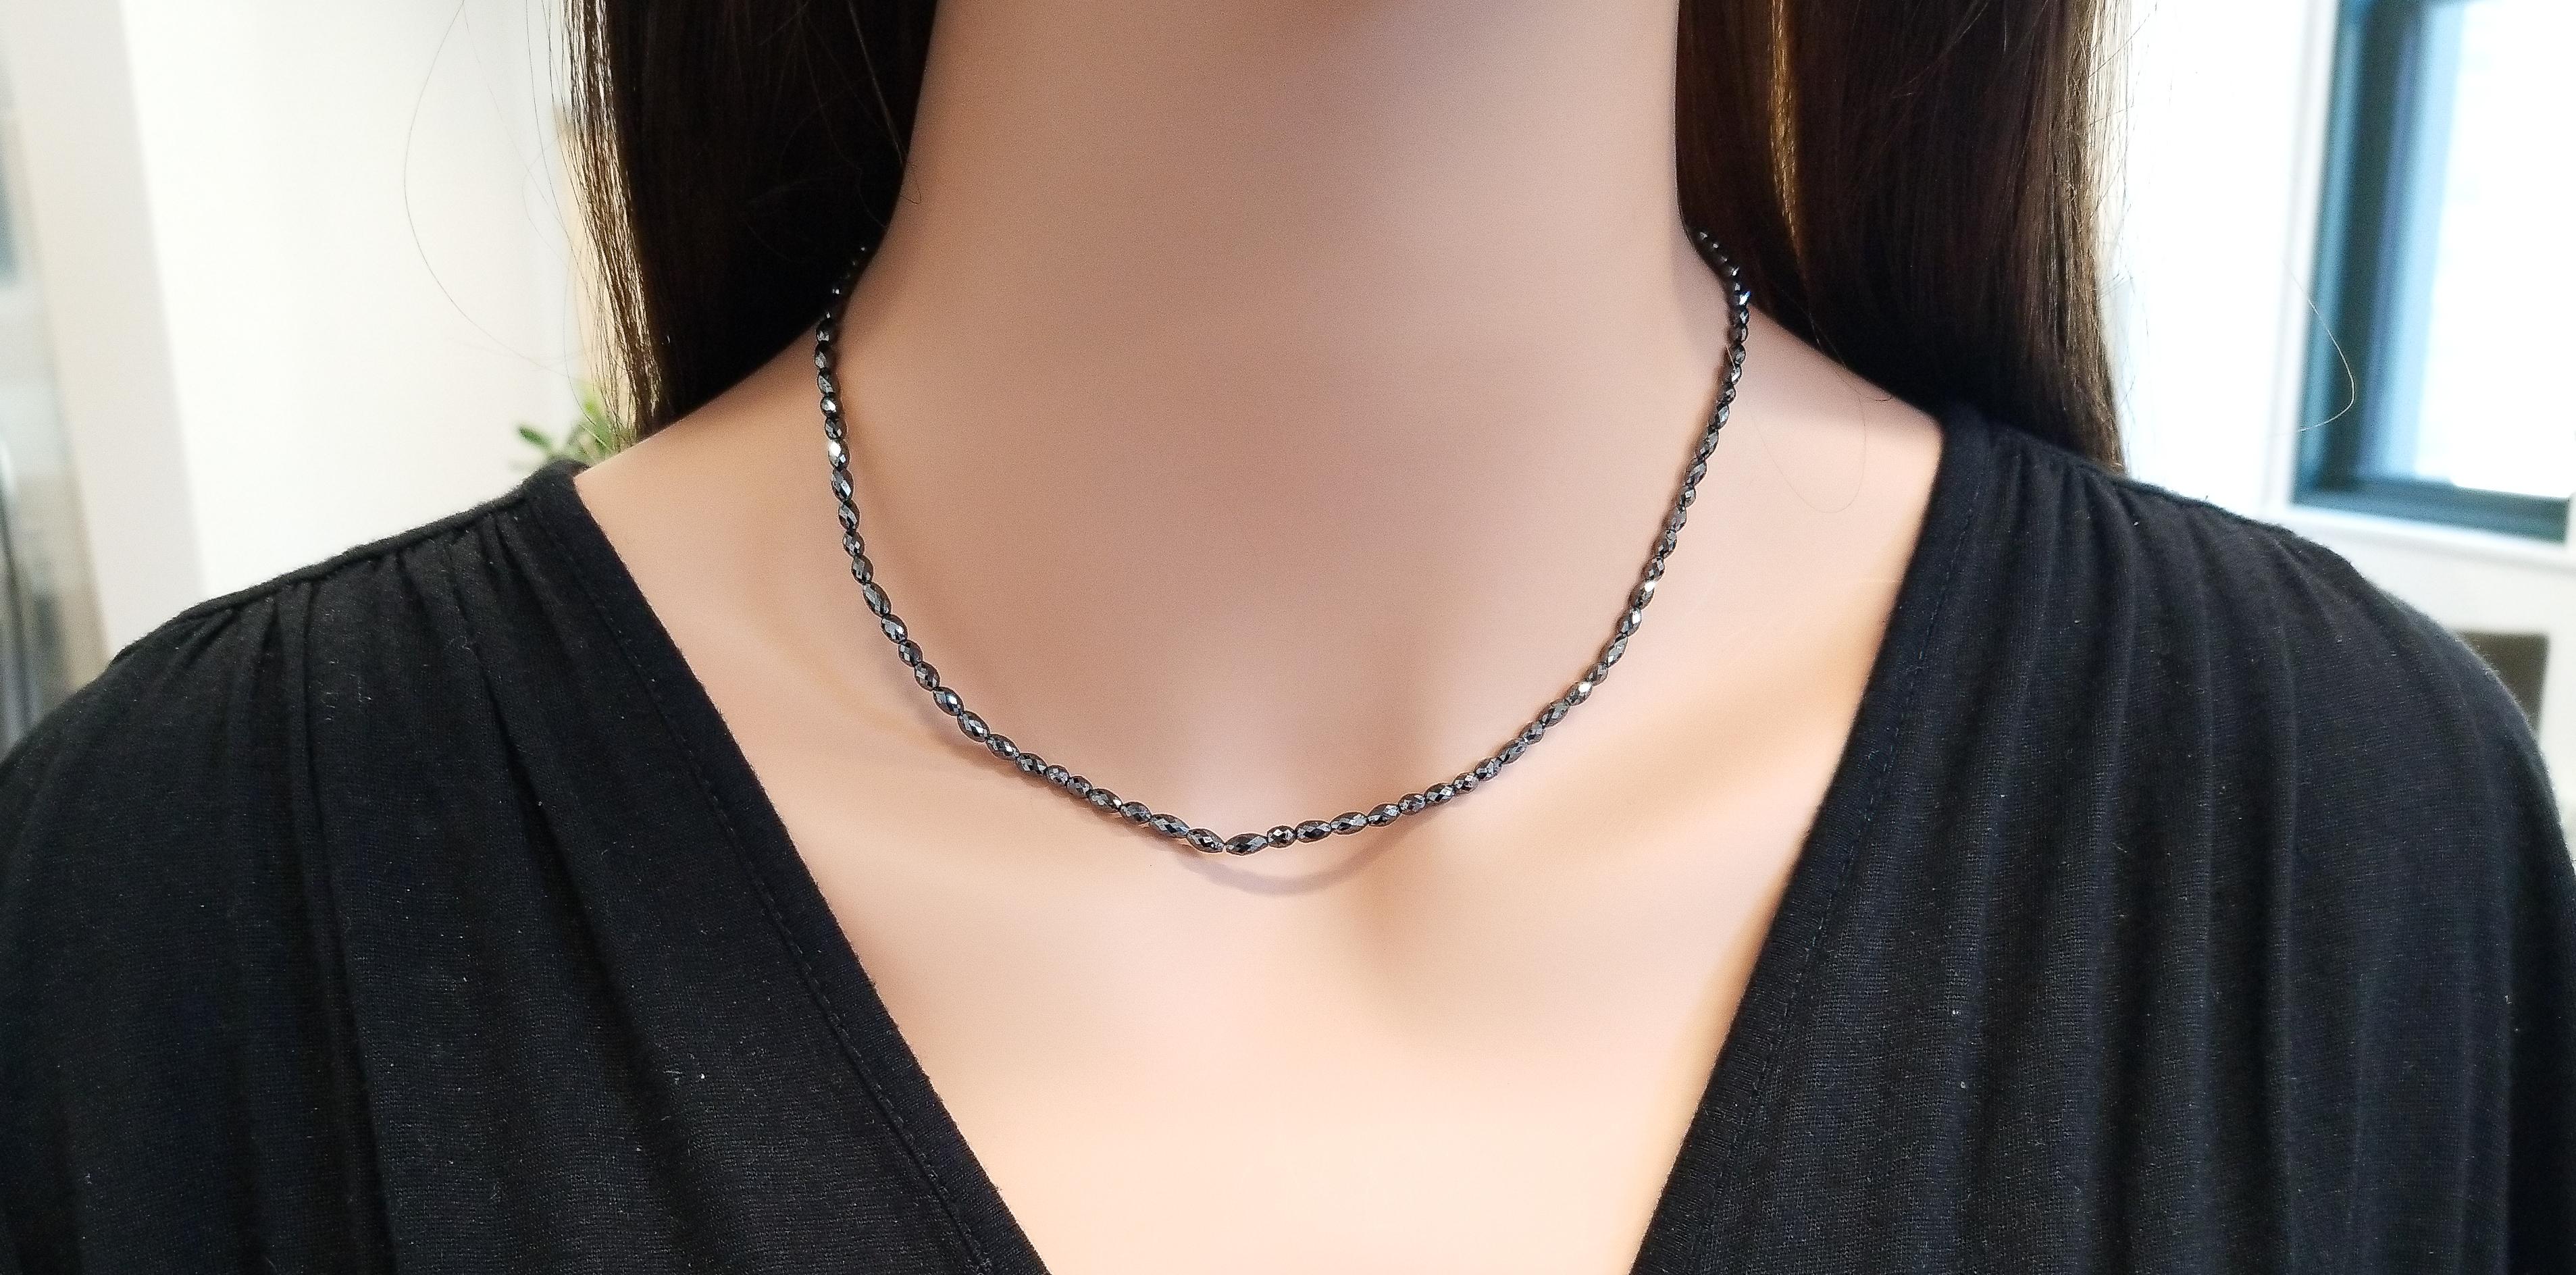 This faceted natural black diamond necklace is distinct and significant. A total of 101 oval shaped beads of fancy vivid black diamonds adorn this stunning tennis necklace totaling an impressive 32 carats. This diamond necklace closes with an oval